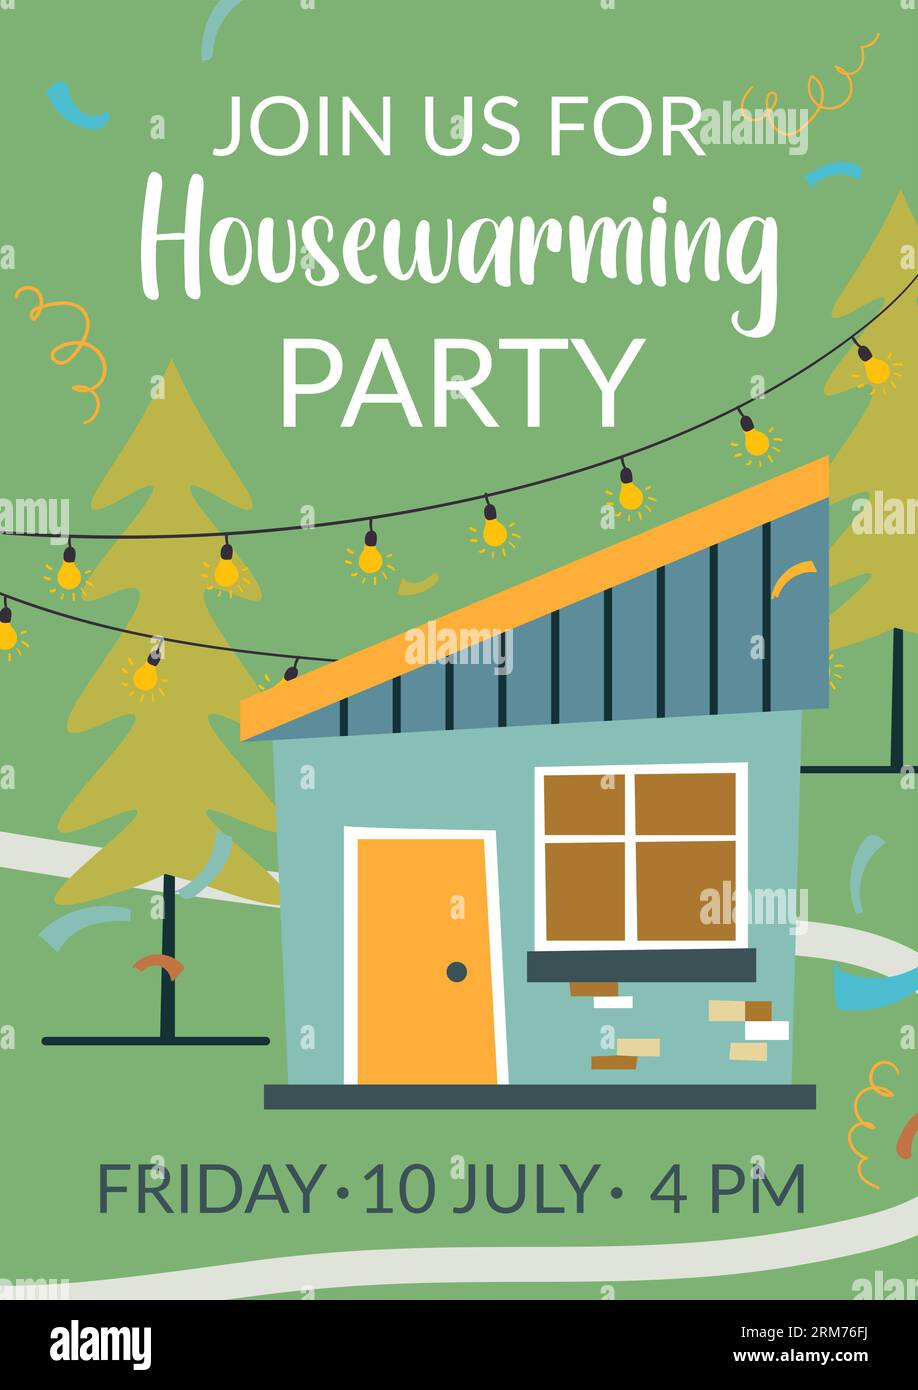 Join us for housewarming party, invitation card Stock Vector